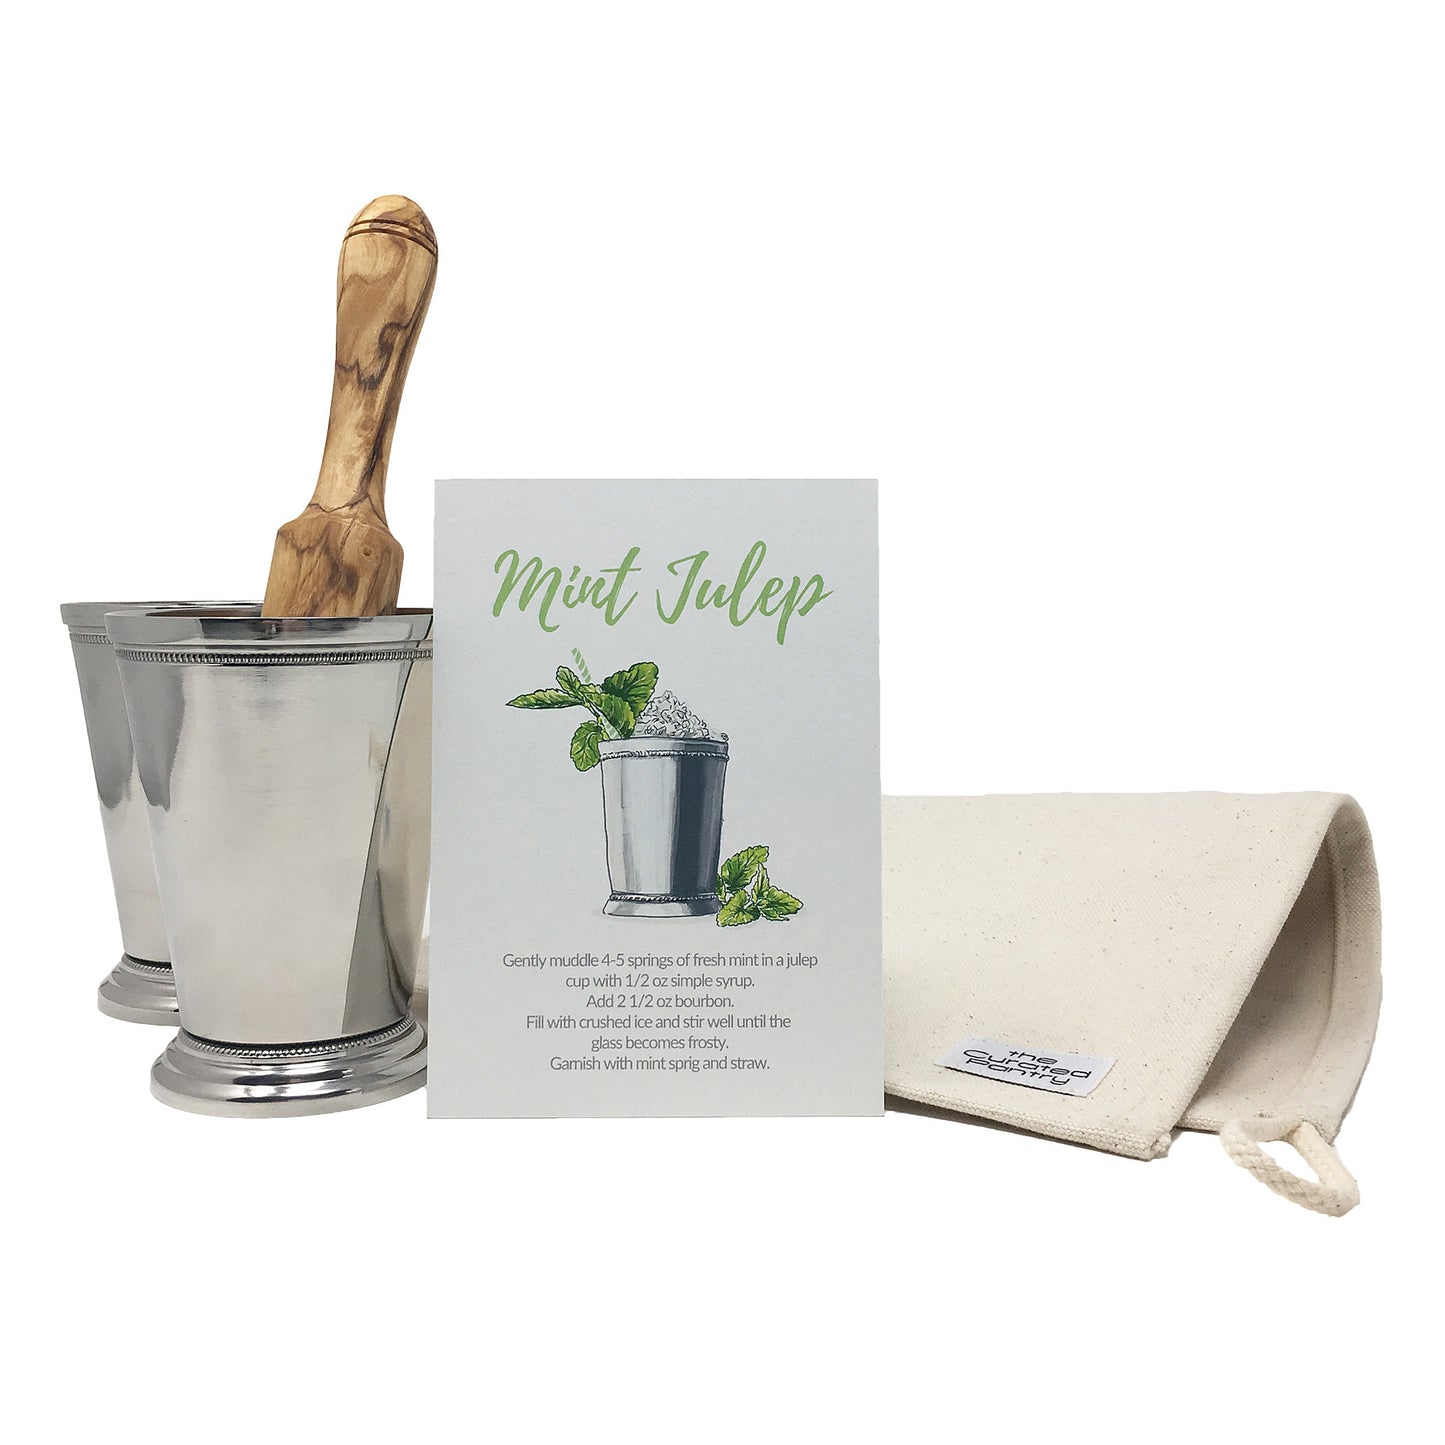 Mint Julep Essentials Tool Kit - Includes Mugs, Lewis Bag for Crushing Ice + Muddler